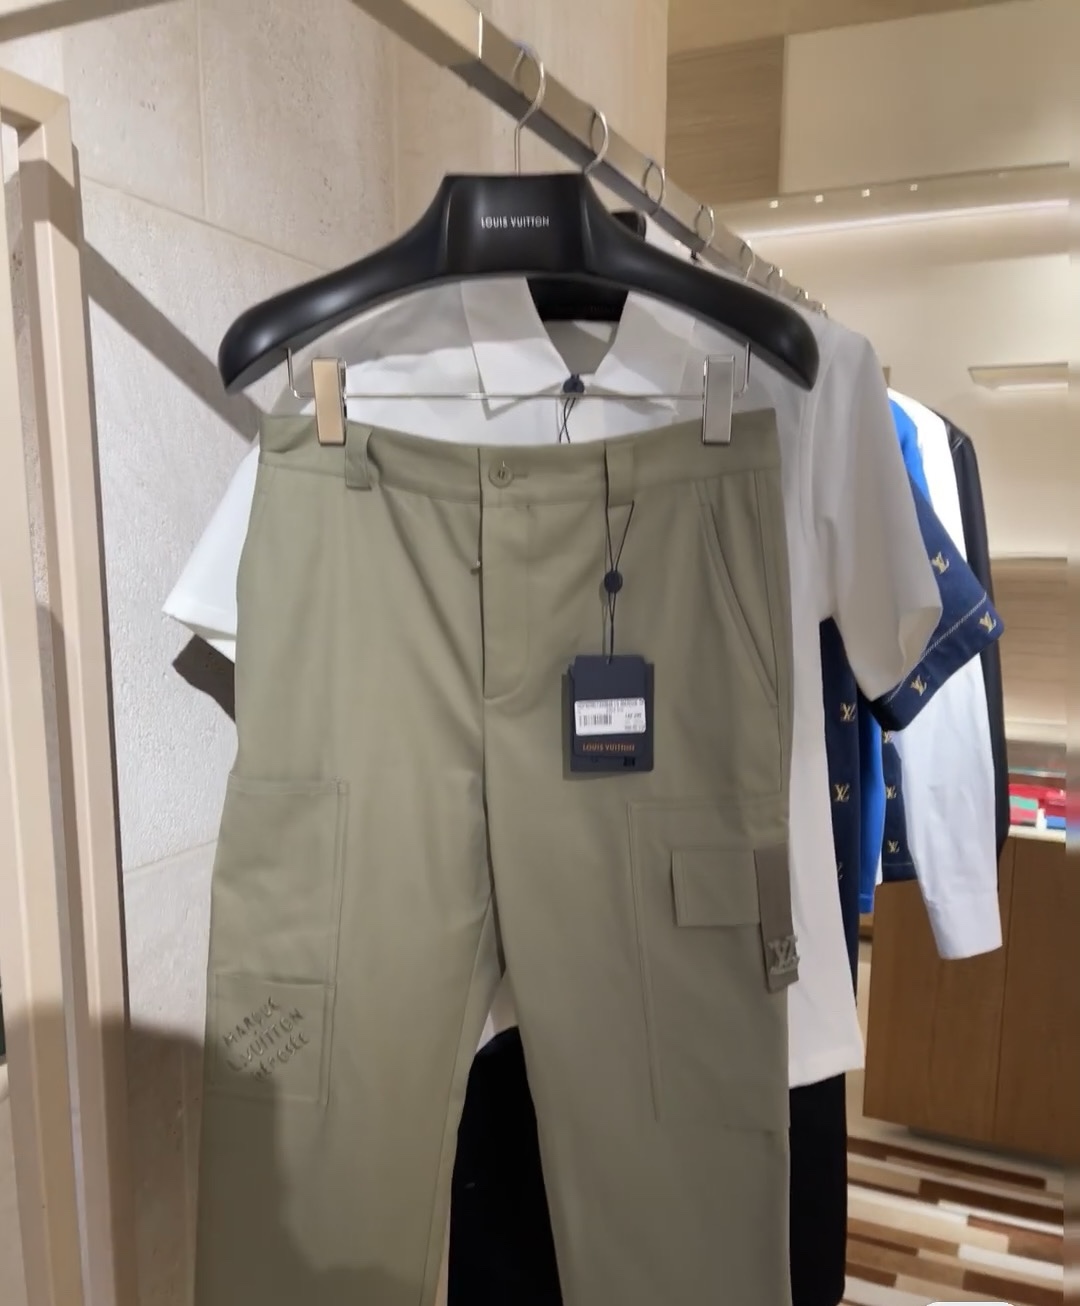 Louis Vuitton Clothing Pants & Trousers Black Brown Green Summer Collection Fashion Casual